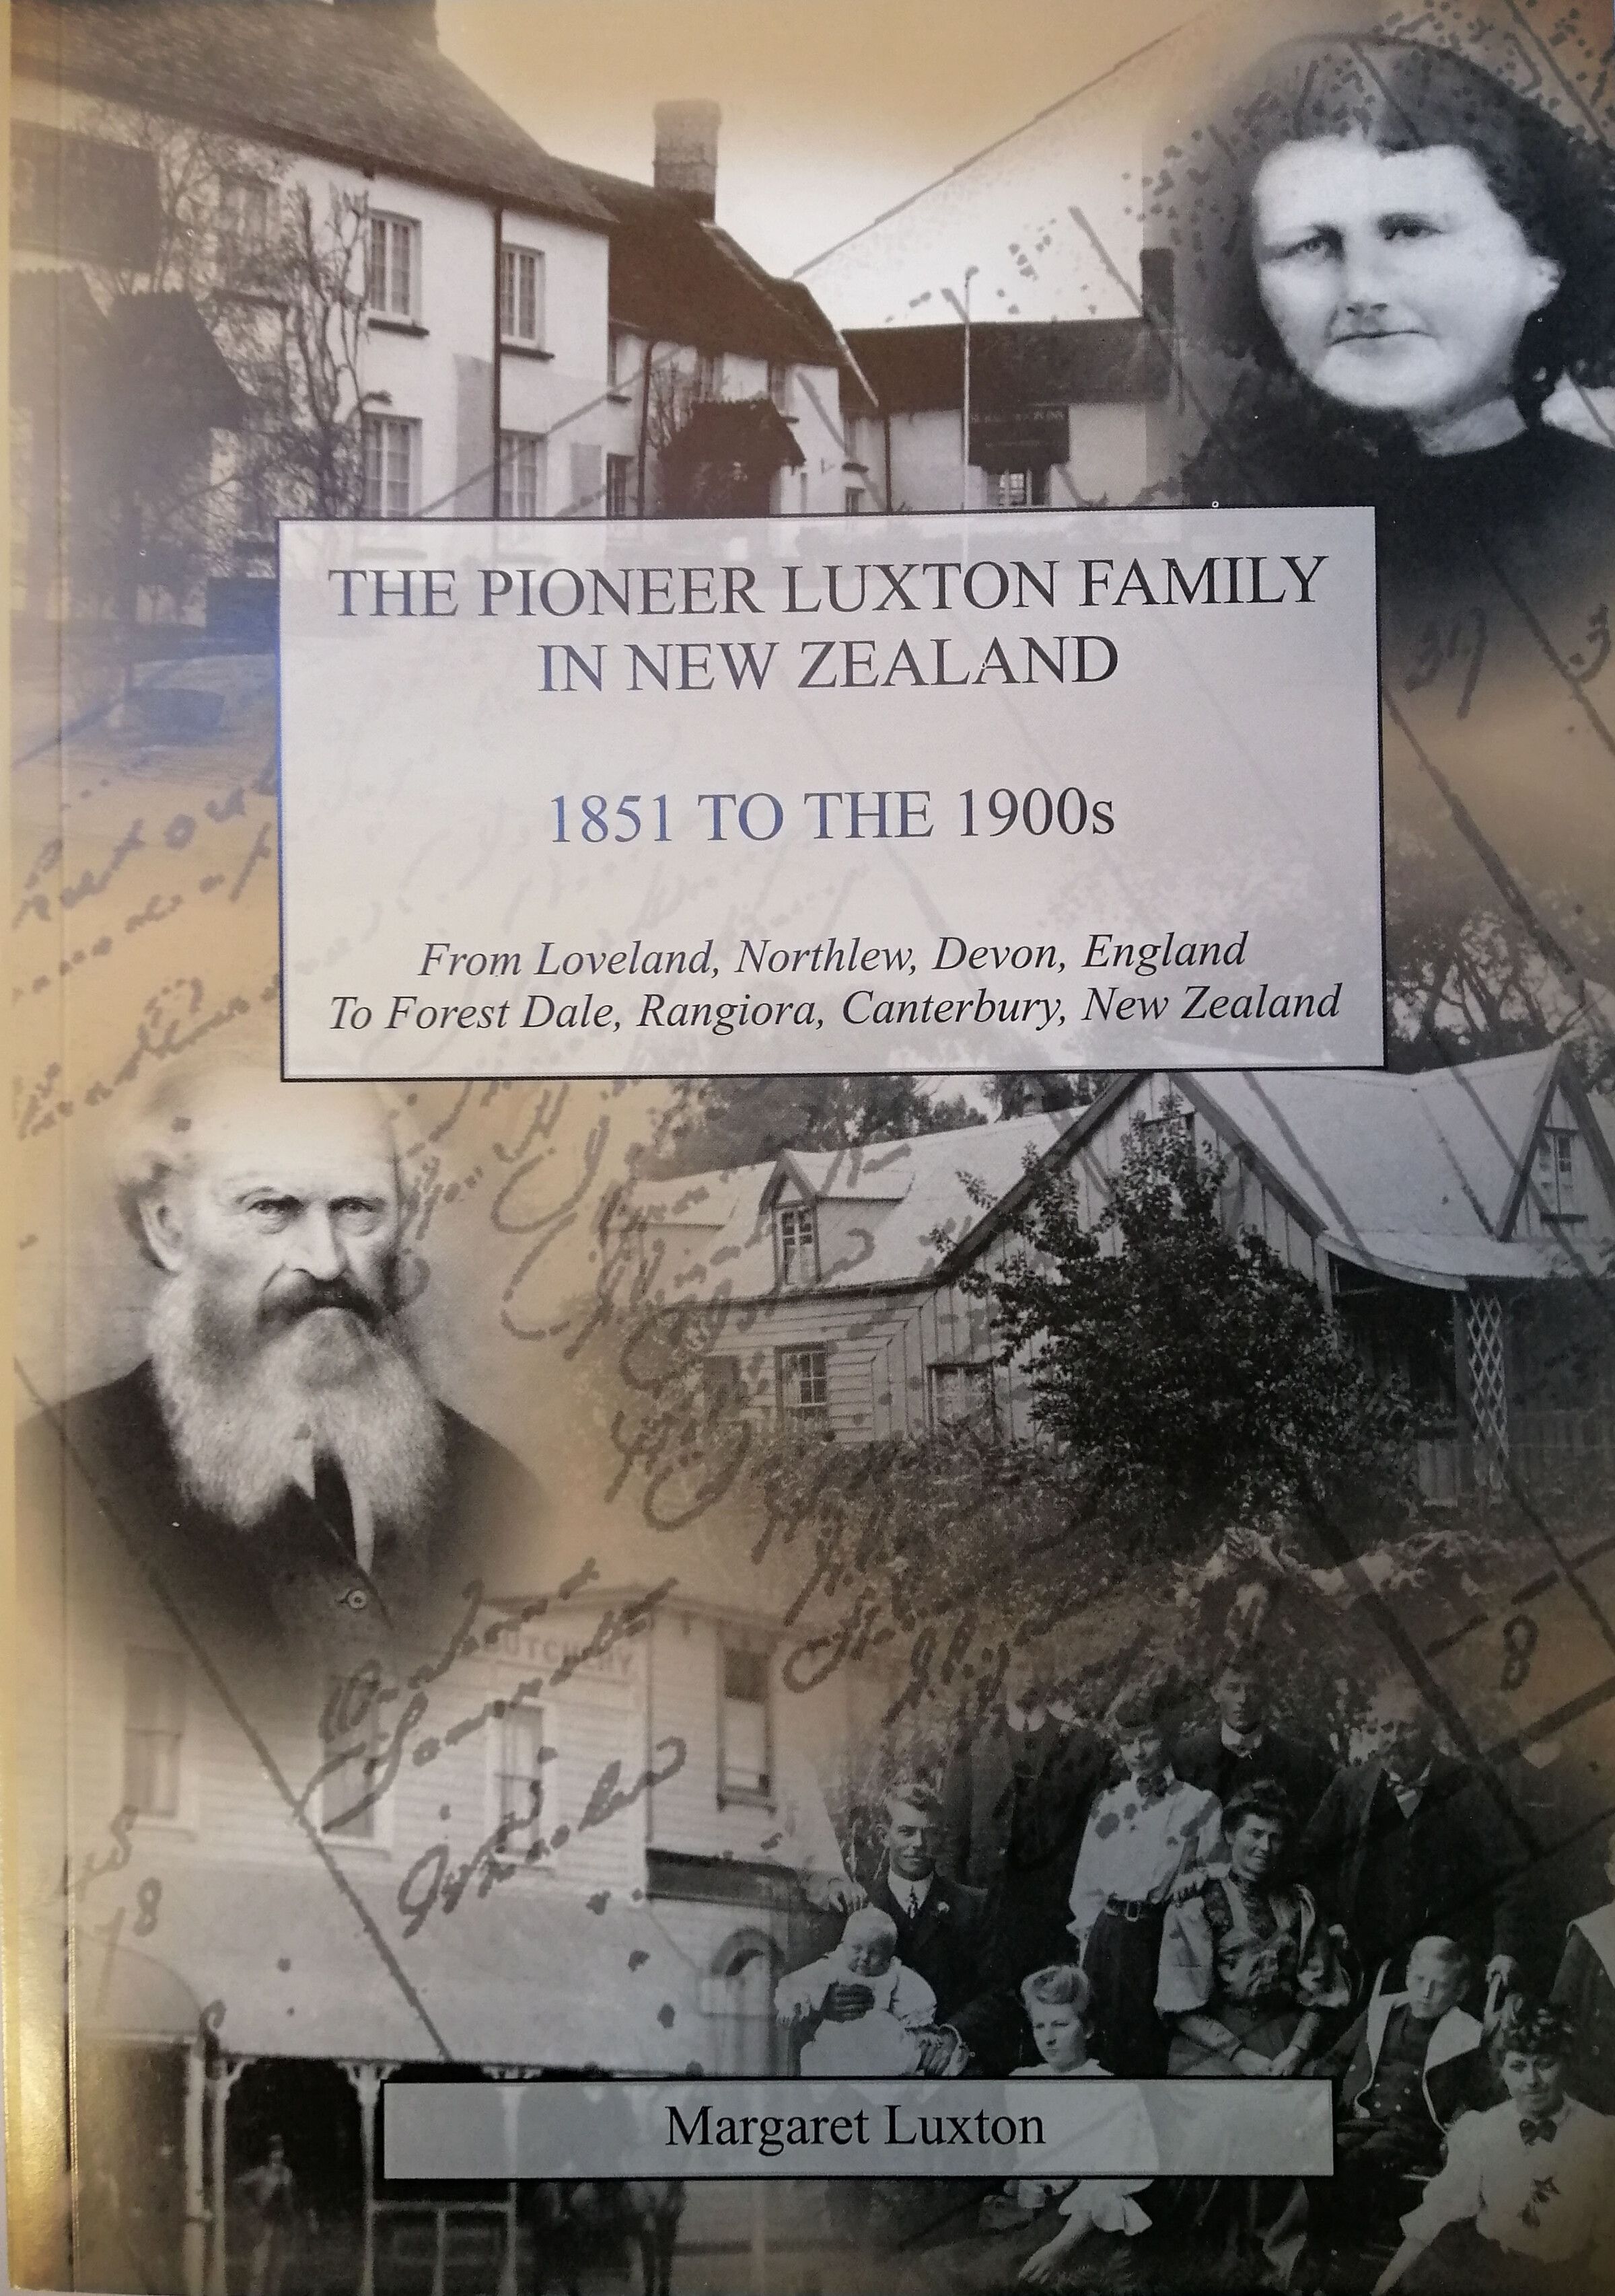 Book - The pioneer Luxton family in New Zealand  1851 to the 1900s